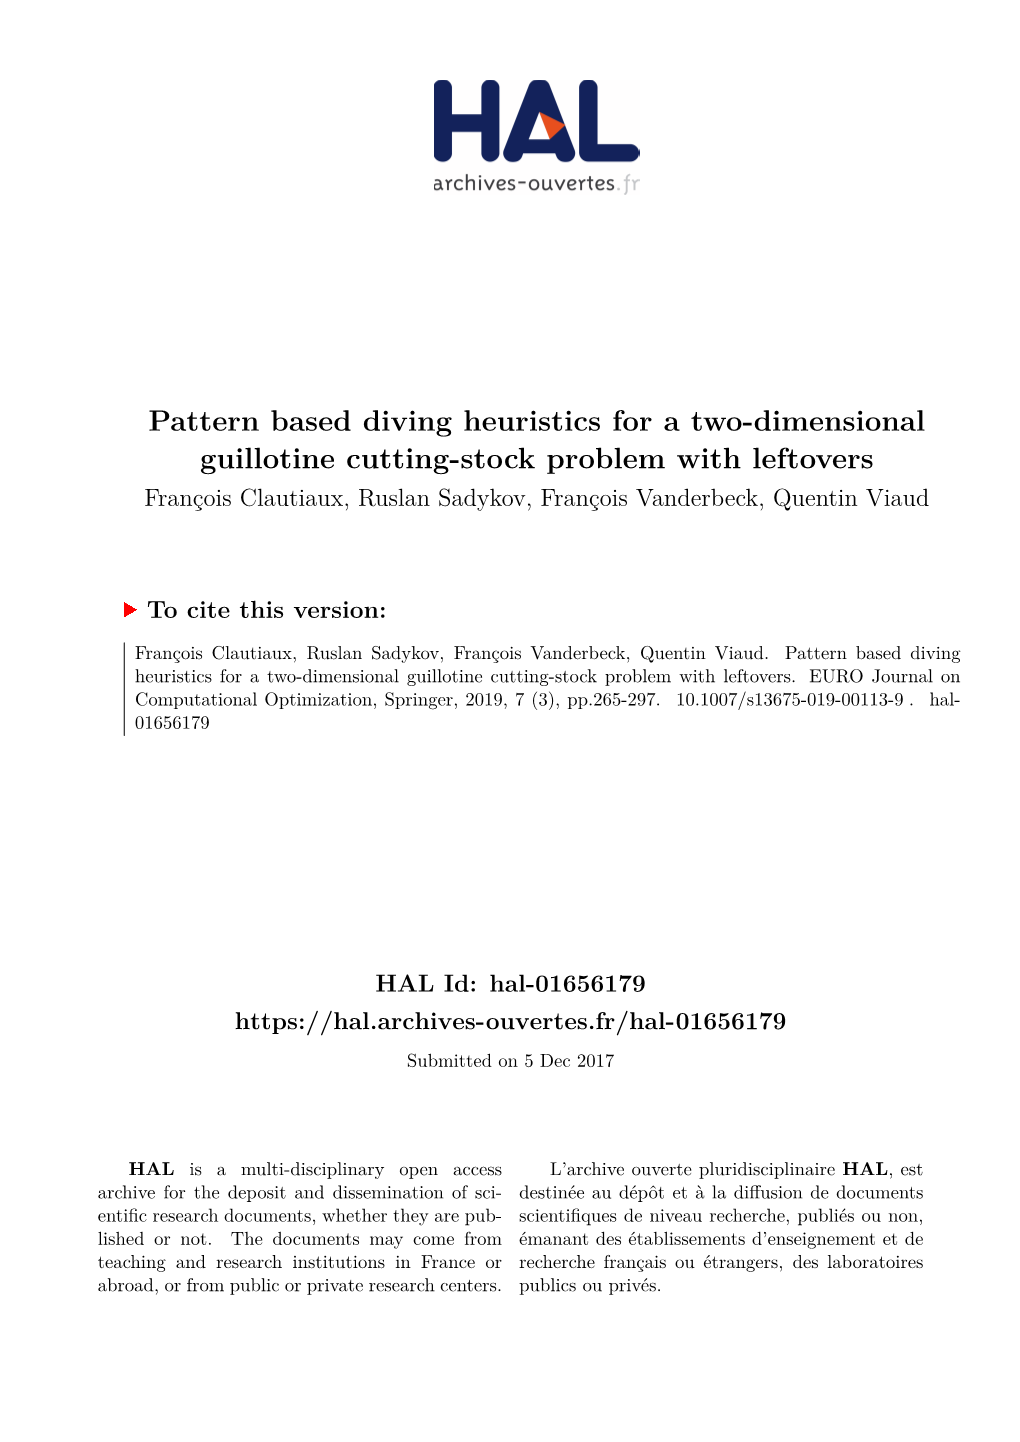 Pattern Based Diving Heuristics for a Two-Dimensional Guillotine Cutting